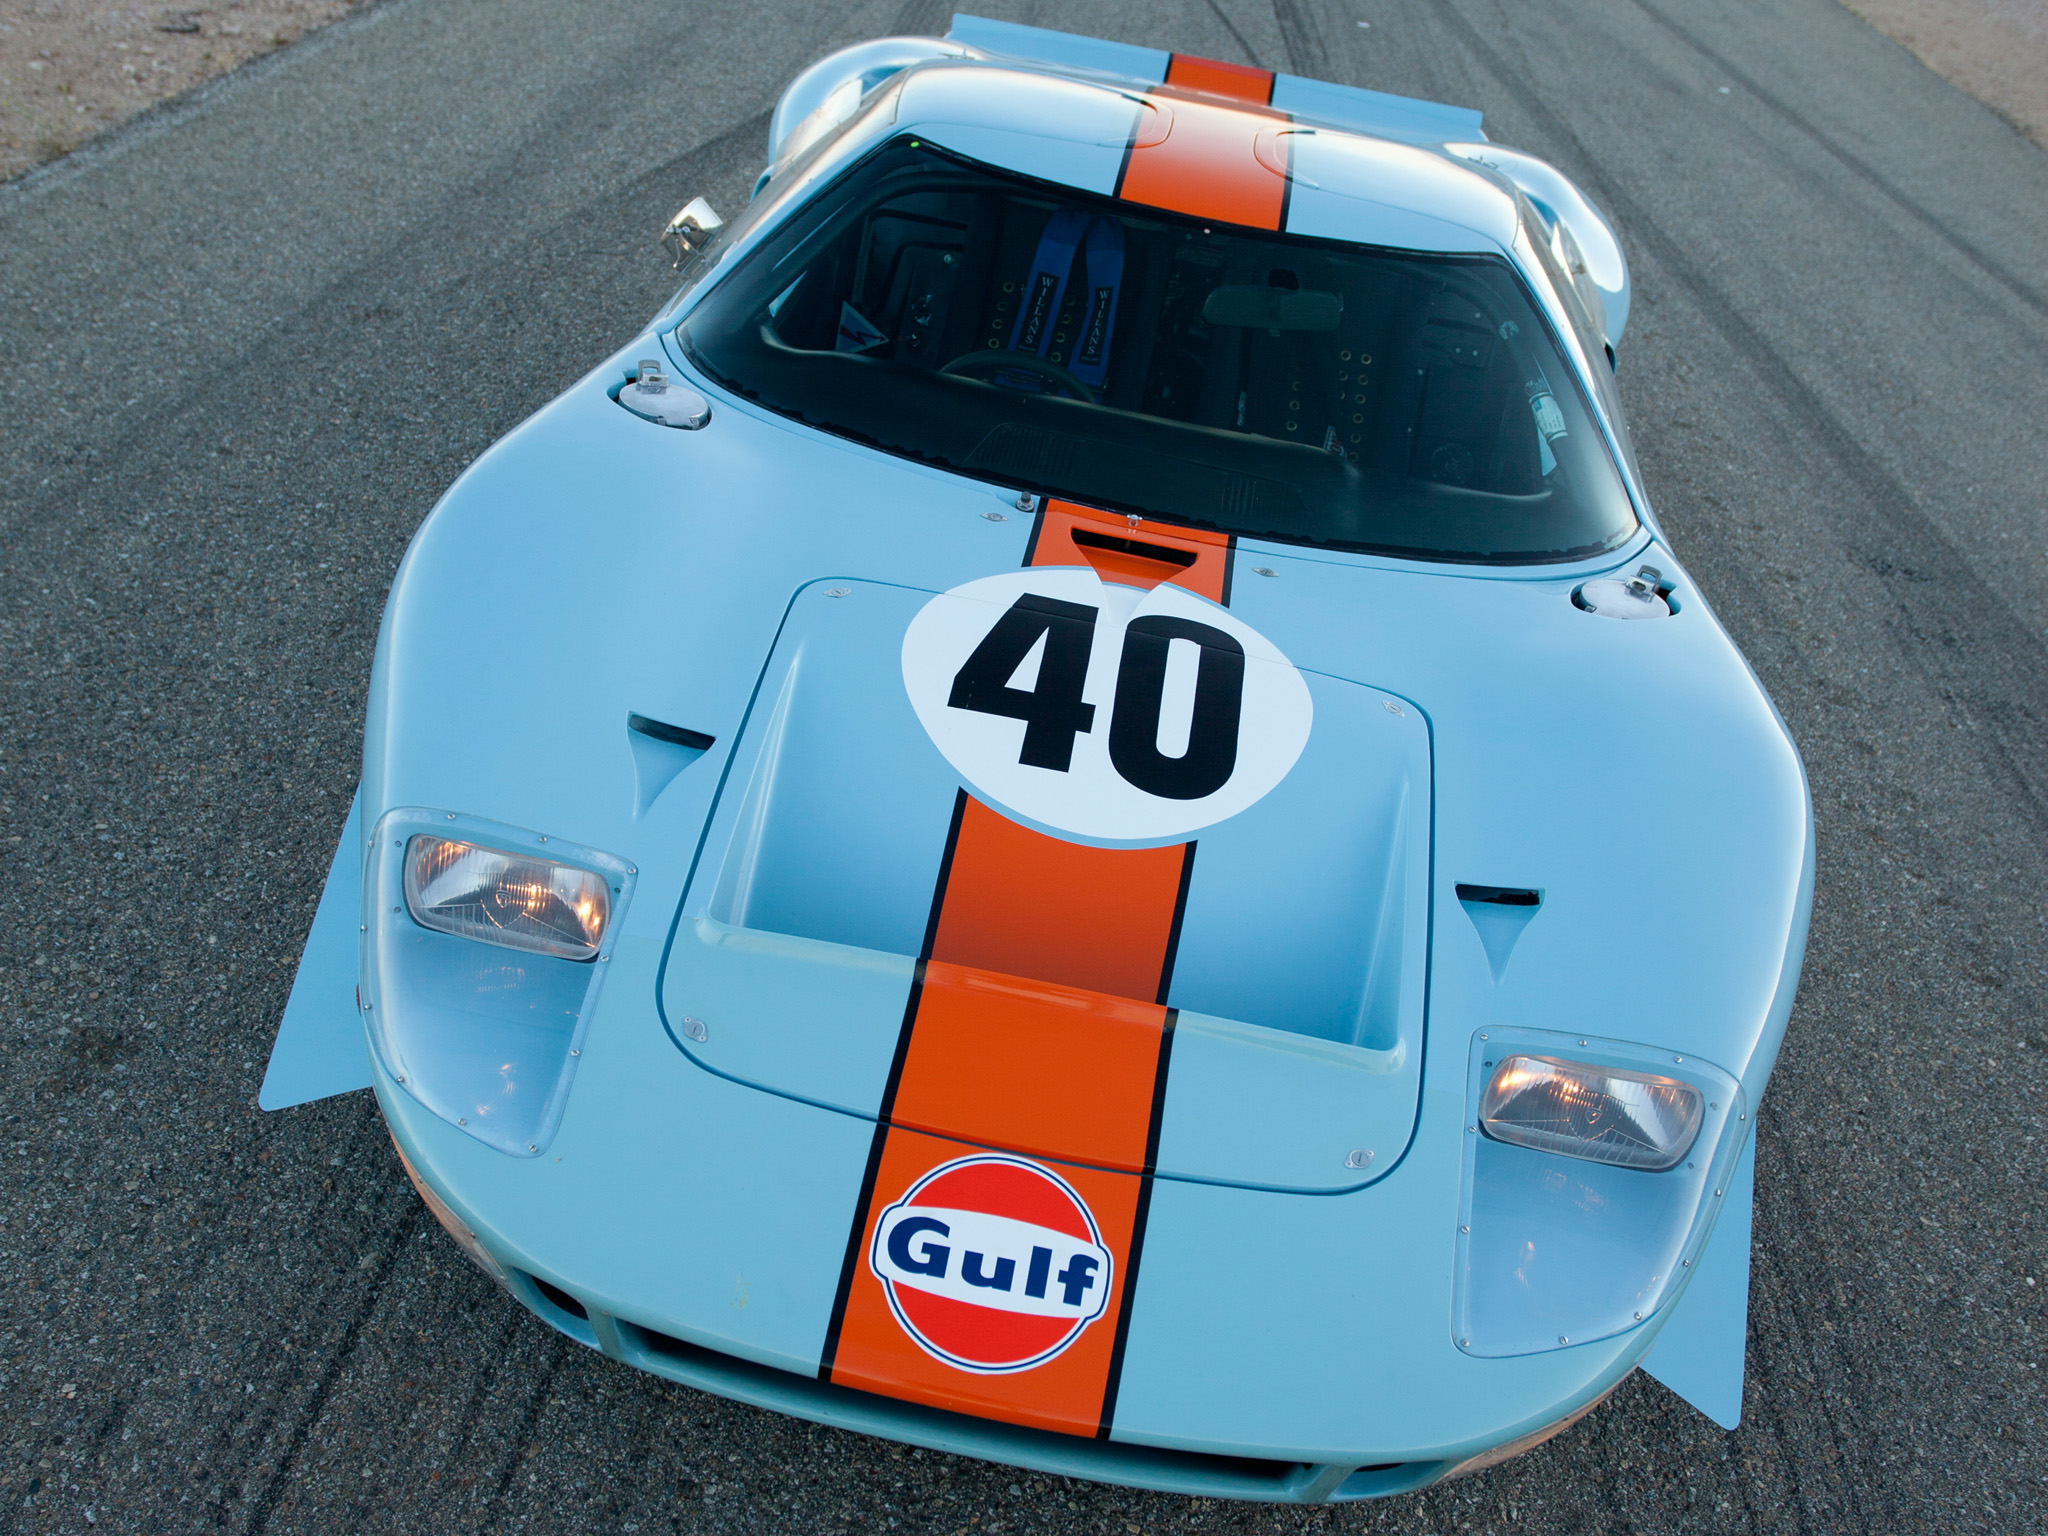 1968, Ford, Gt40, Gulf oil, Le mans, Race, Racing, Supercar, Classic Wallpaper